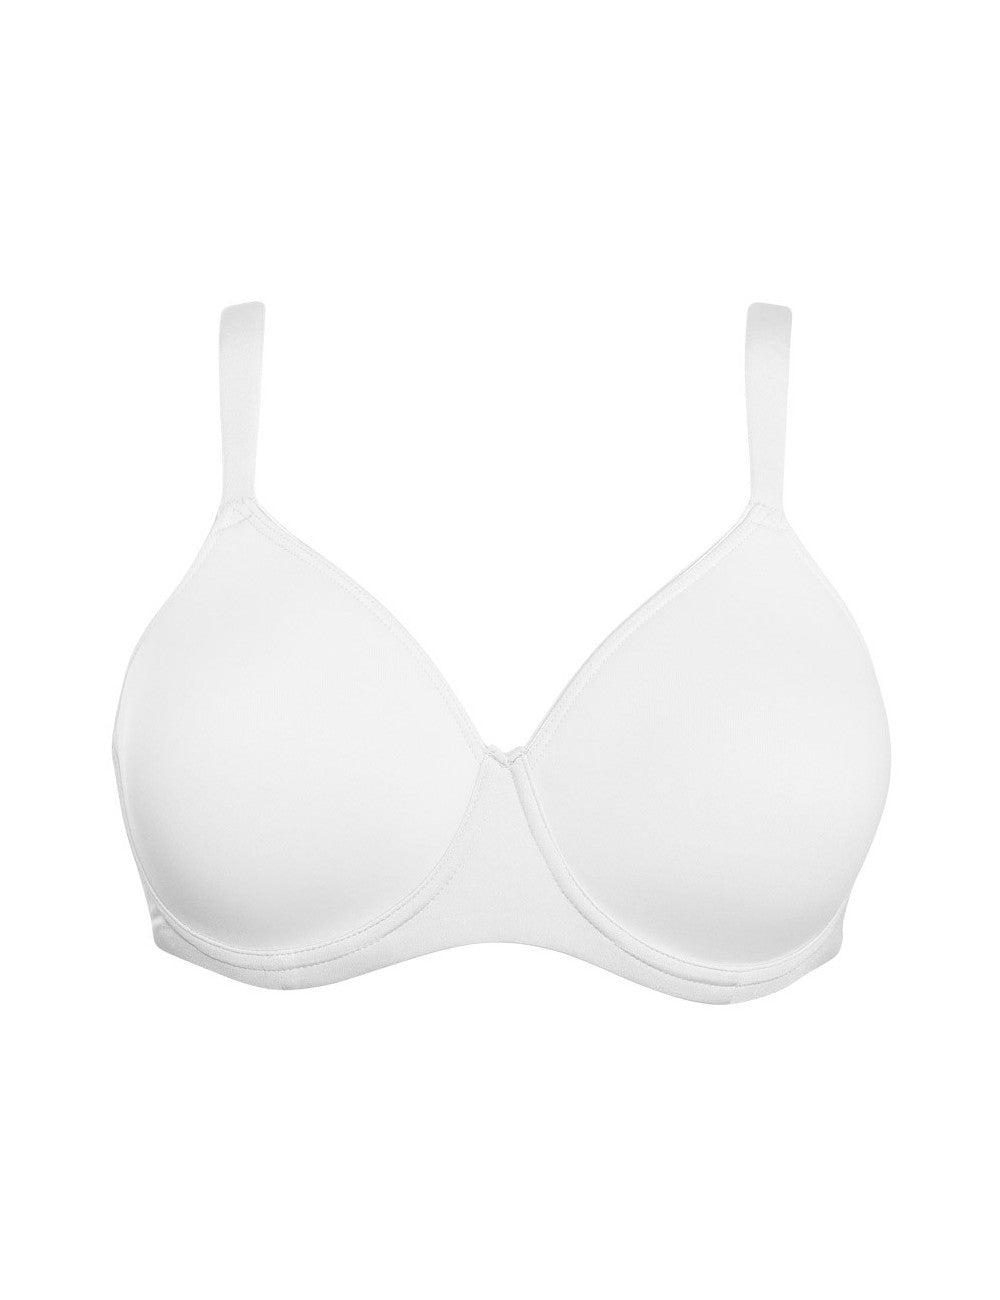 White, underwire spacer cup bra from the Plus line by SIéLEI from Italy.